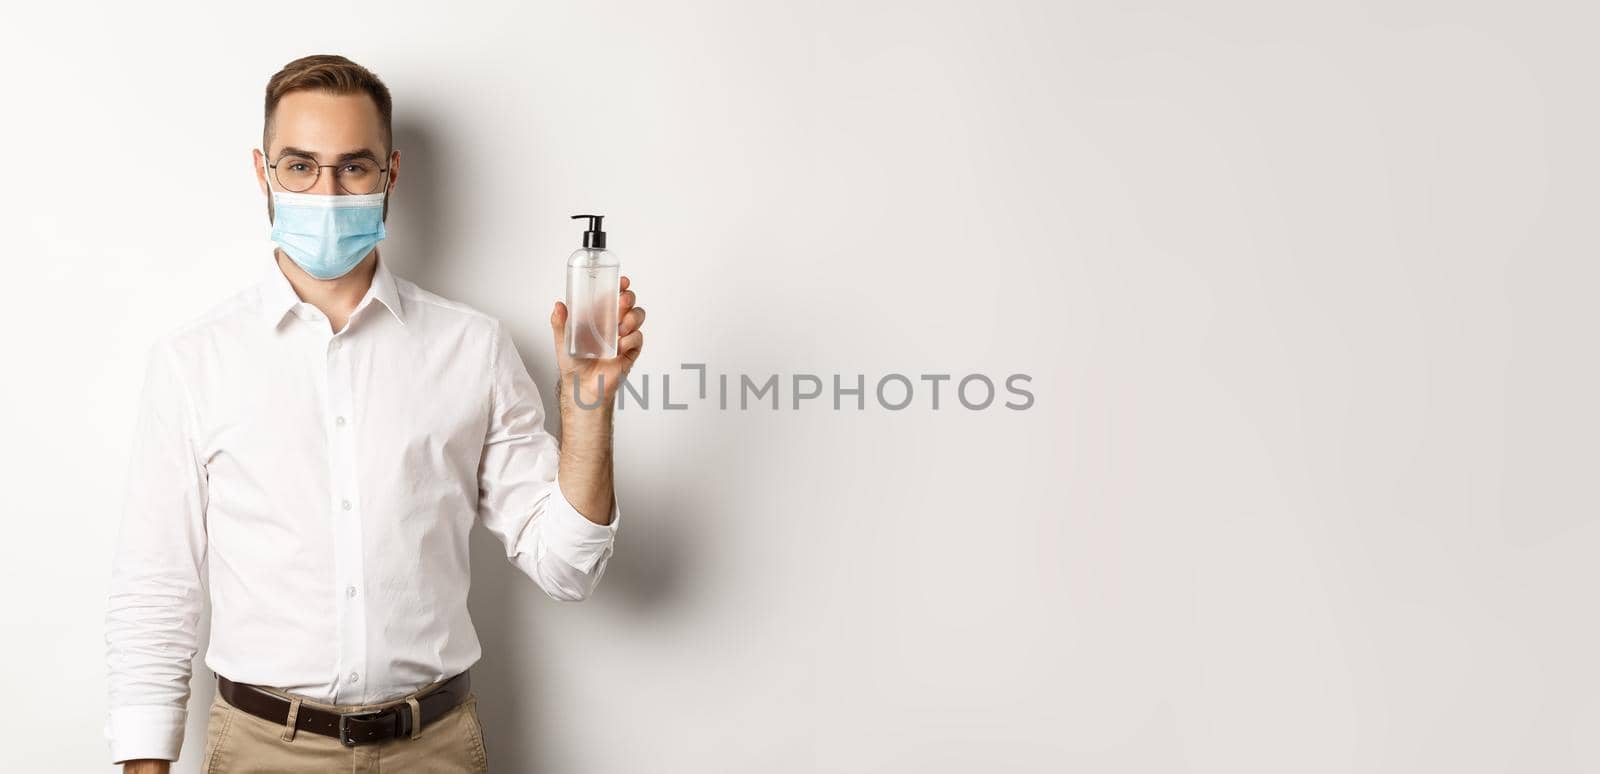 Covid-19, social distancing and quarantine concept. Employer in medical mask showing hand sanitizer, asking to use antiseptic at work, standing over white background.